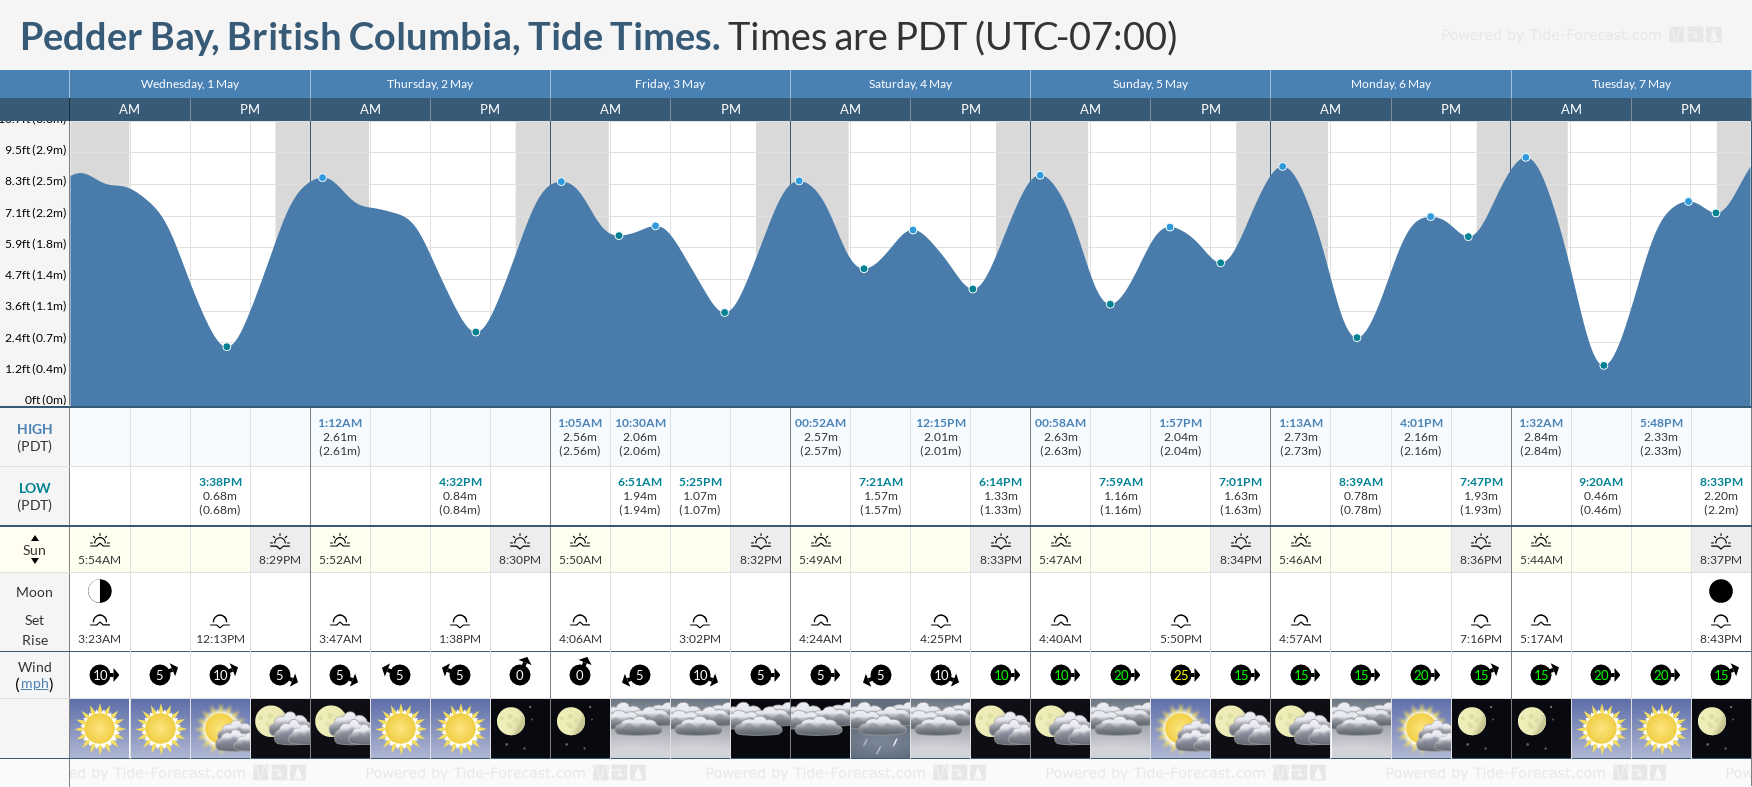 Pedder Bay, British Columbia Tide Chart including high and low tide tide times for the next 7 days